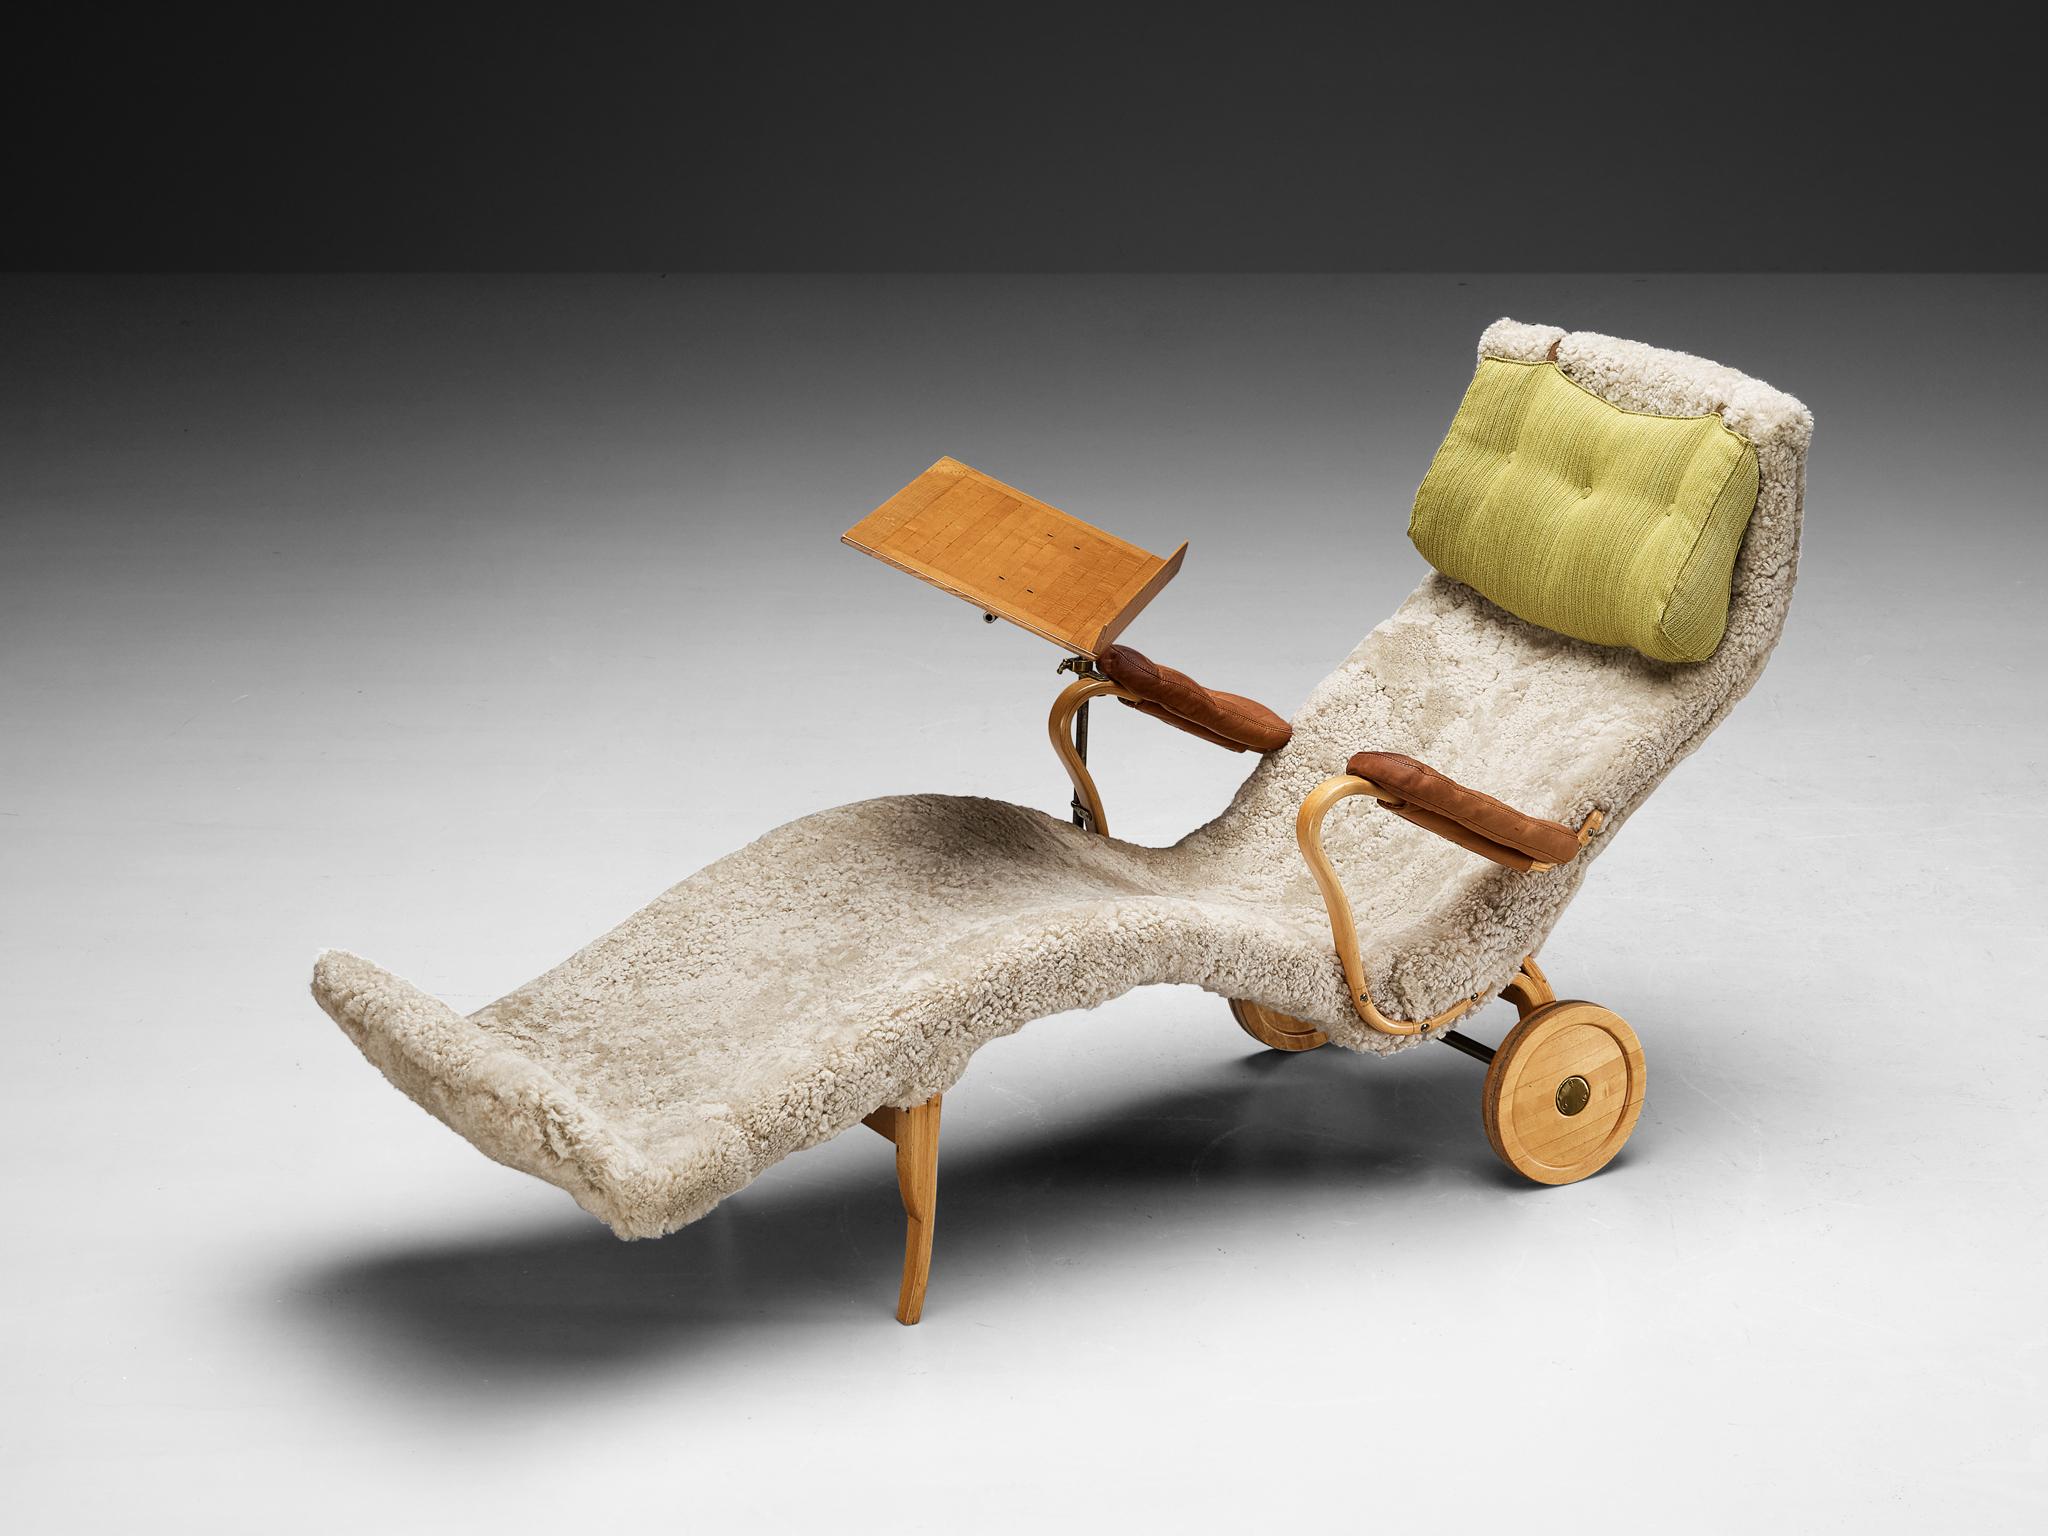 Bruno Mathsson for Karl Mathsson, chaise longue ‘Pernilla’, sheepskin, leather, beech, fabric, brass, Sweden, design 1944

The ‘Pernilla’ chaise longue is one of the most vibrant designs by Swedish designer Bruno Mathsson. The beautifully curved